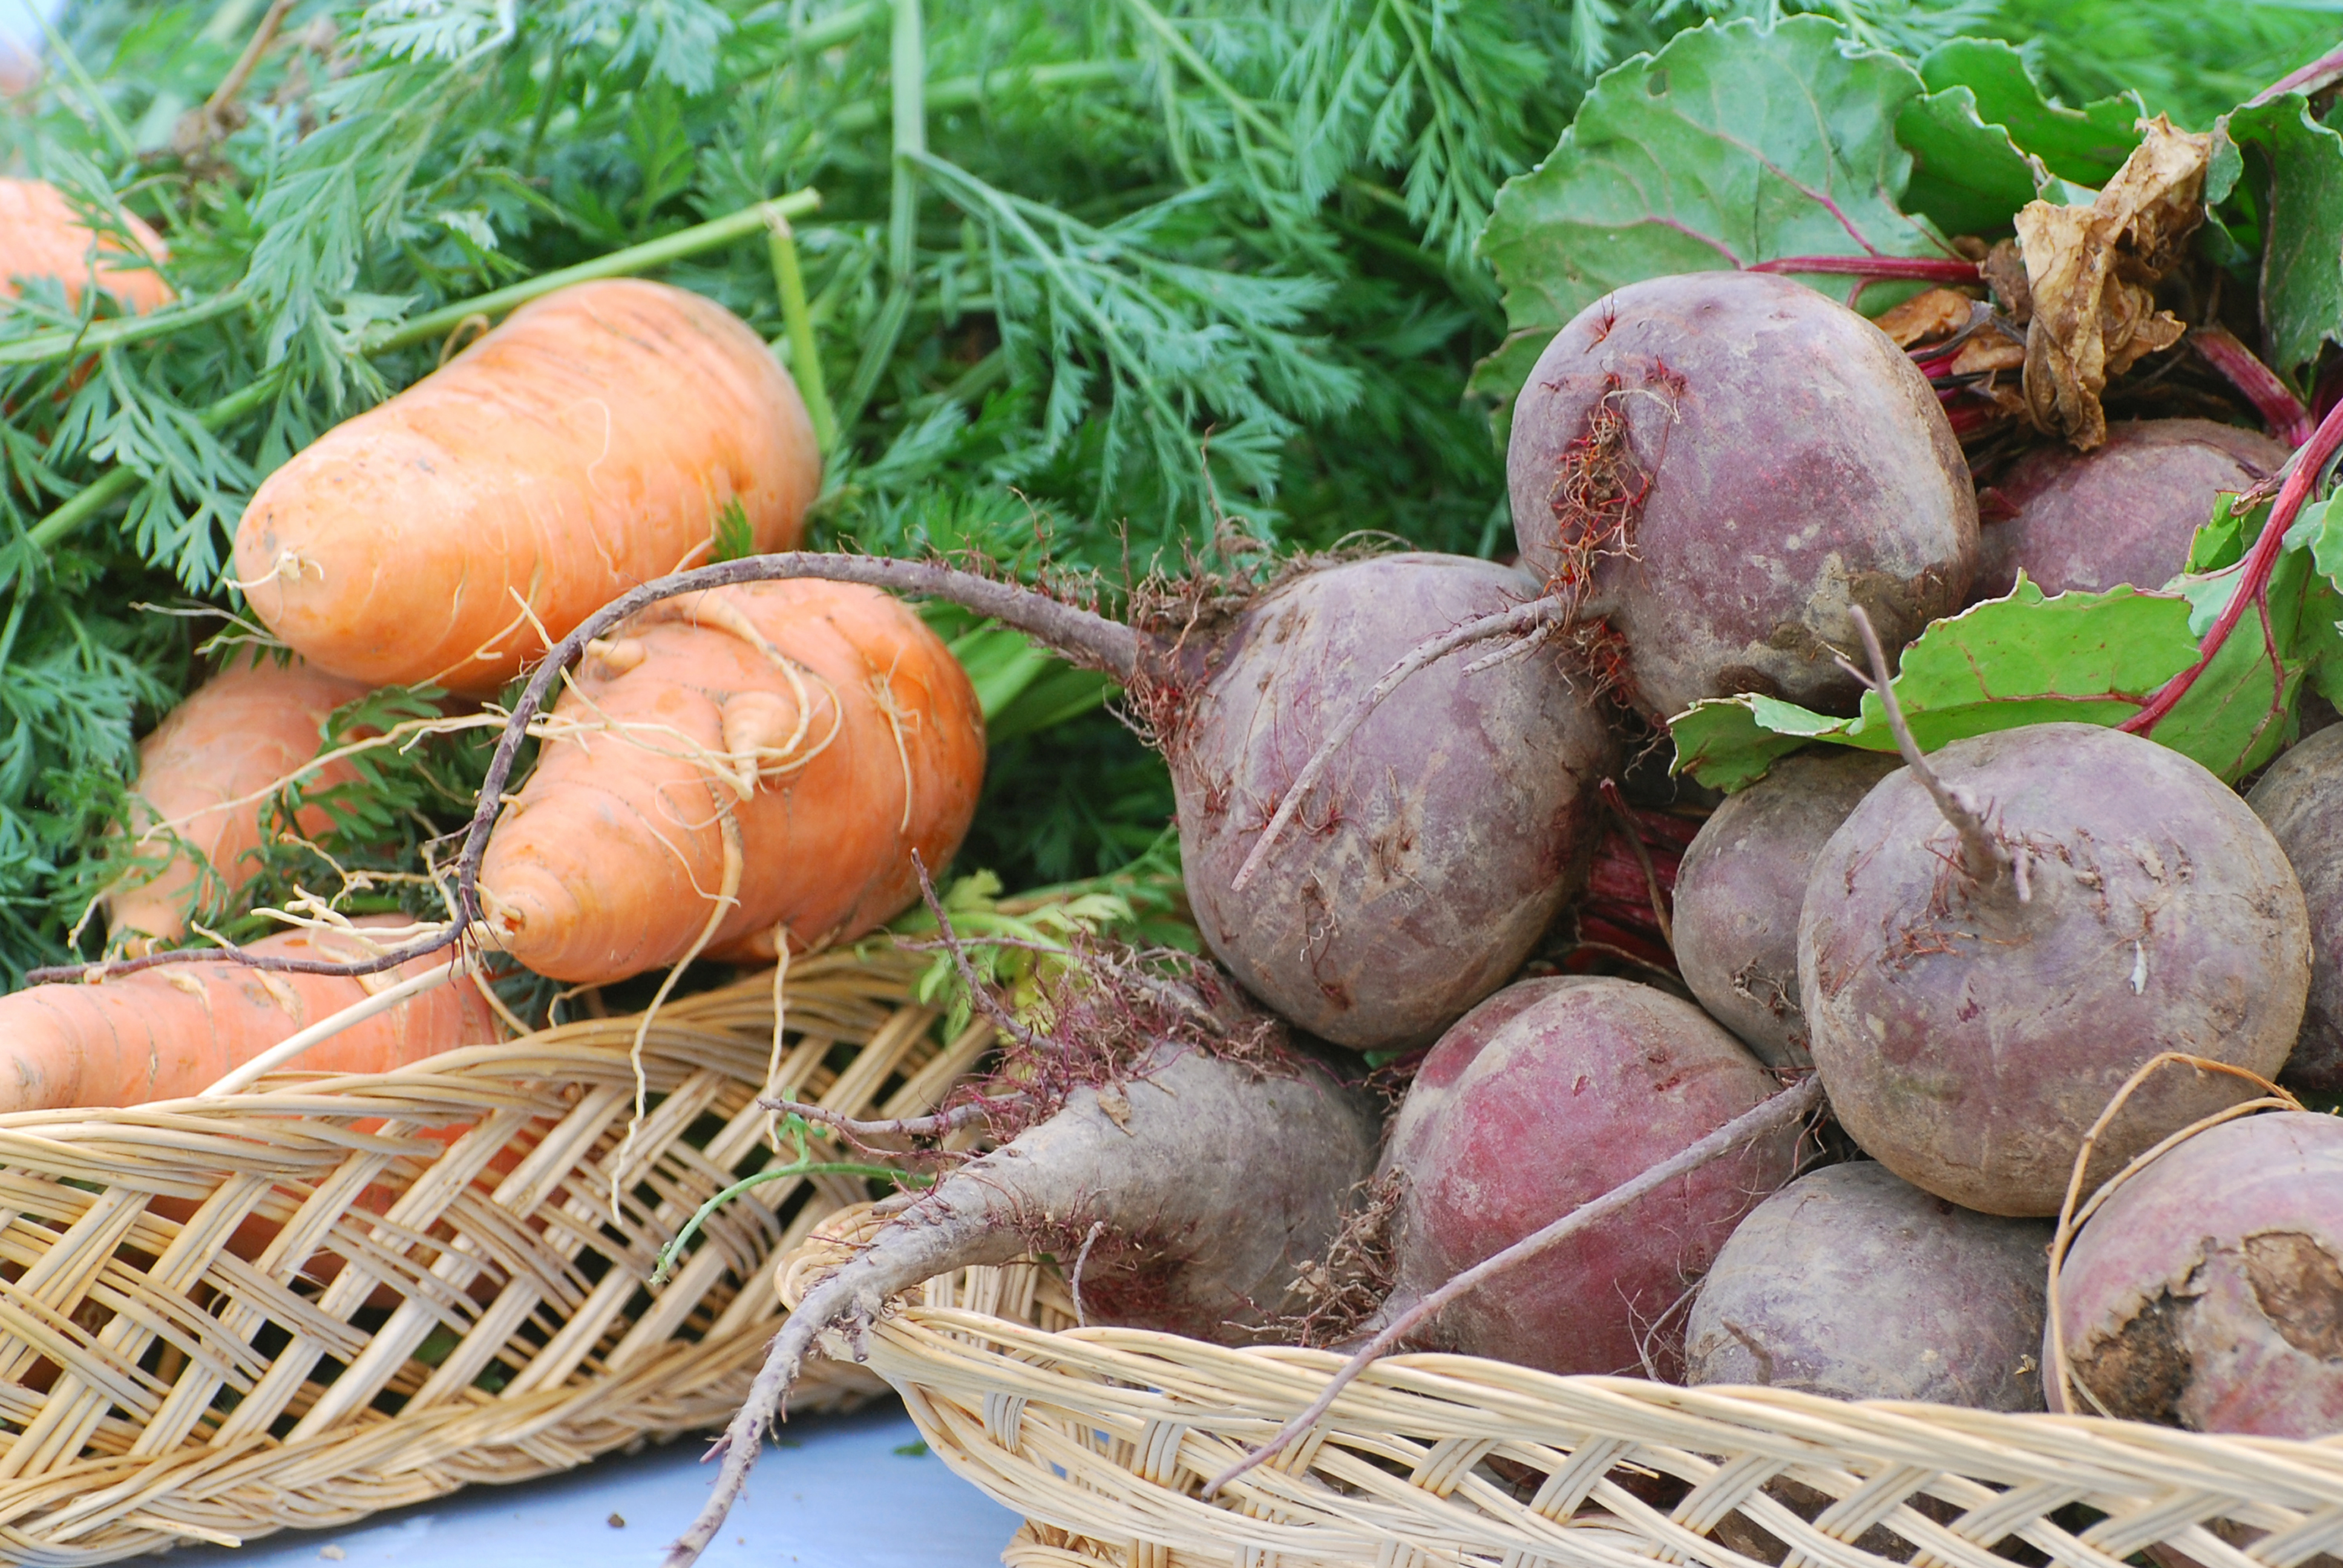 carrots and beets in baskets